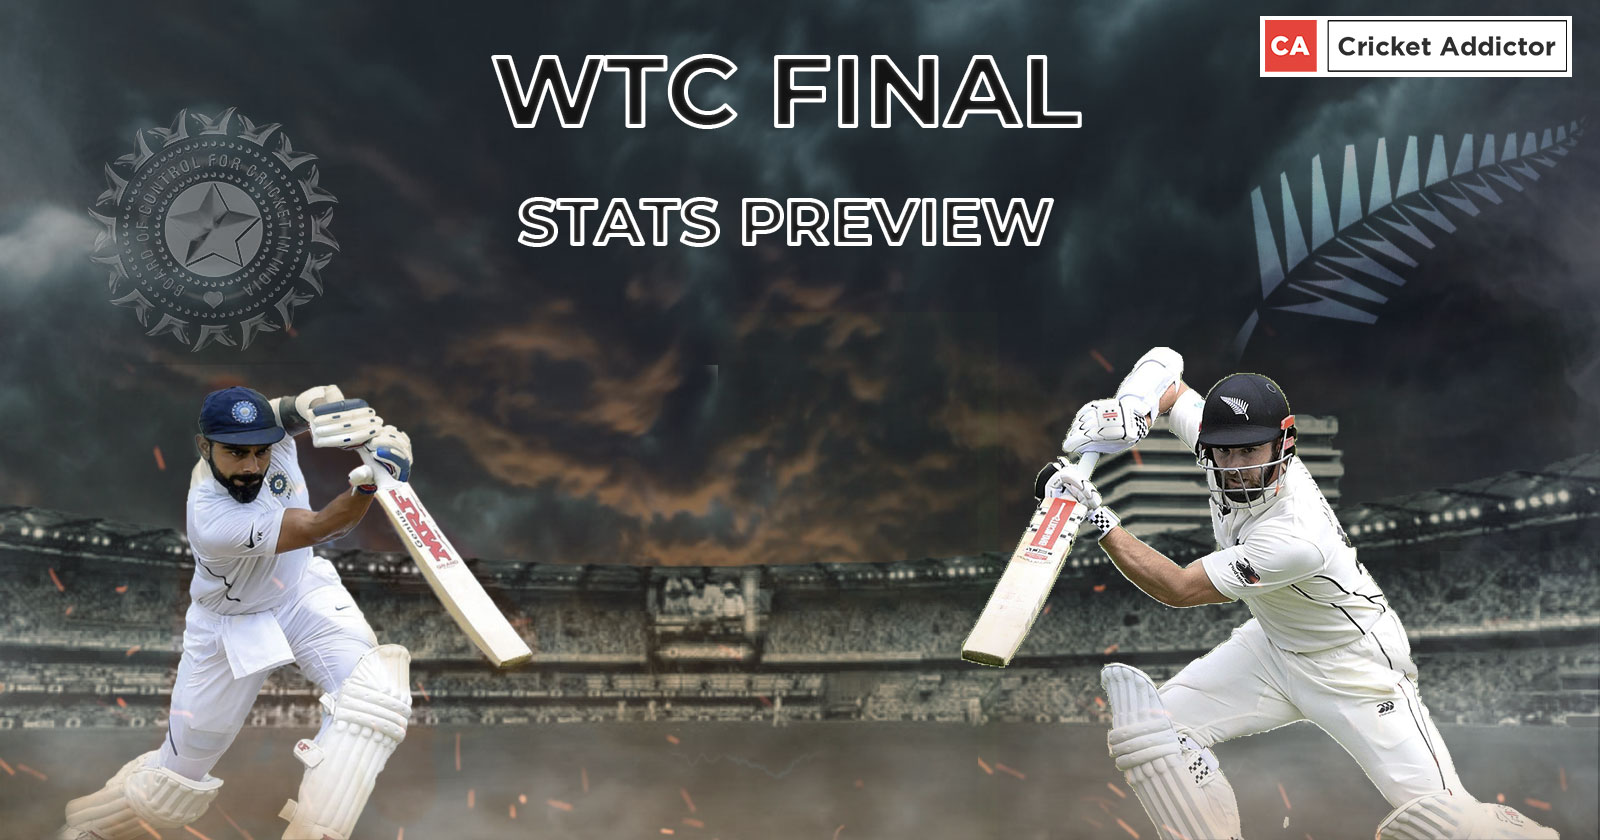 India vs New Zealand WTC Final: Stats Preview